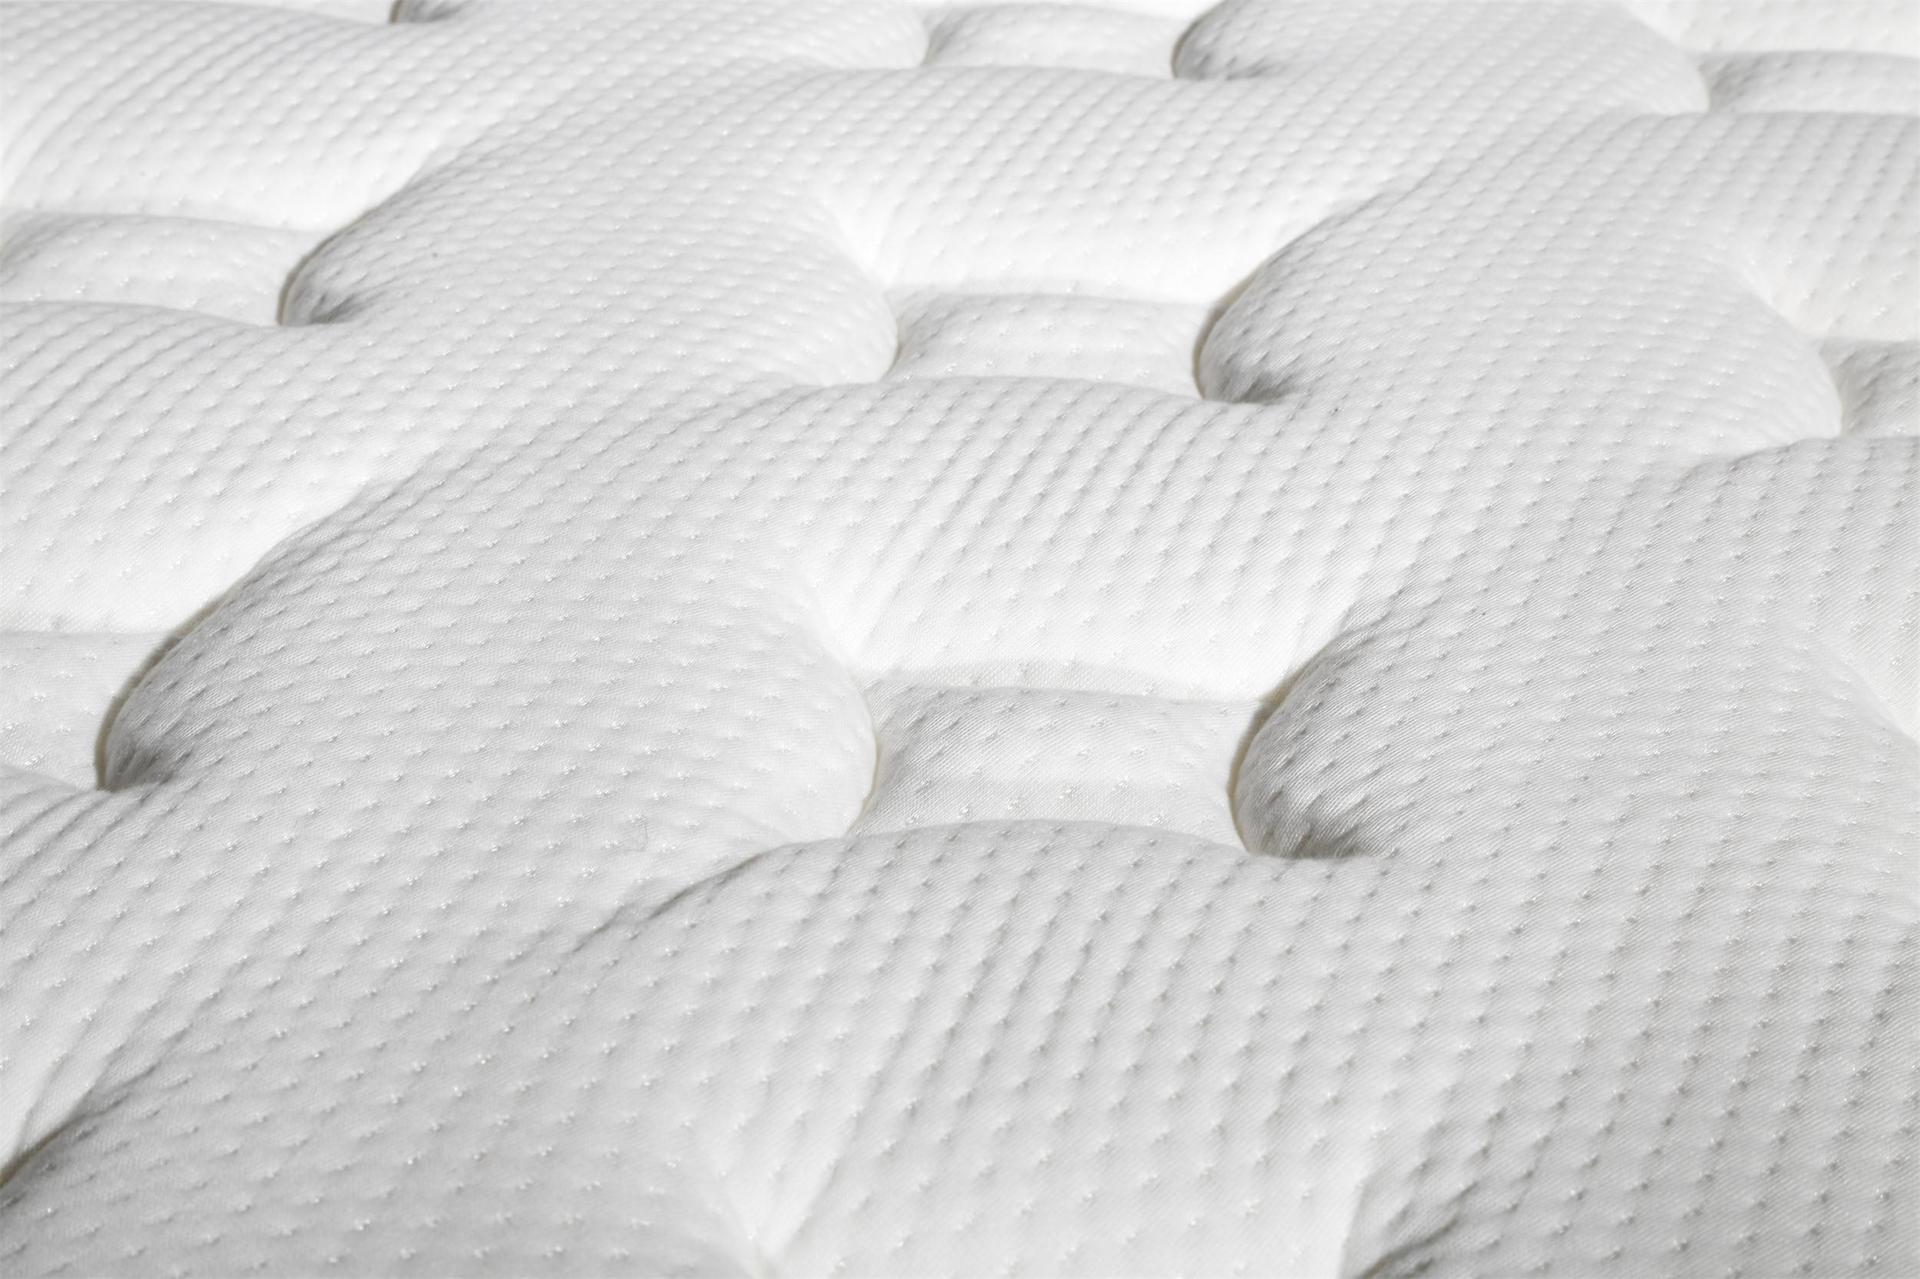 32PA-17 Hotel Pocket Spring Queen Mattress With High-Density Memory Foam